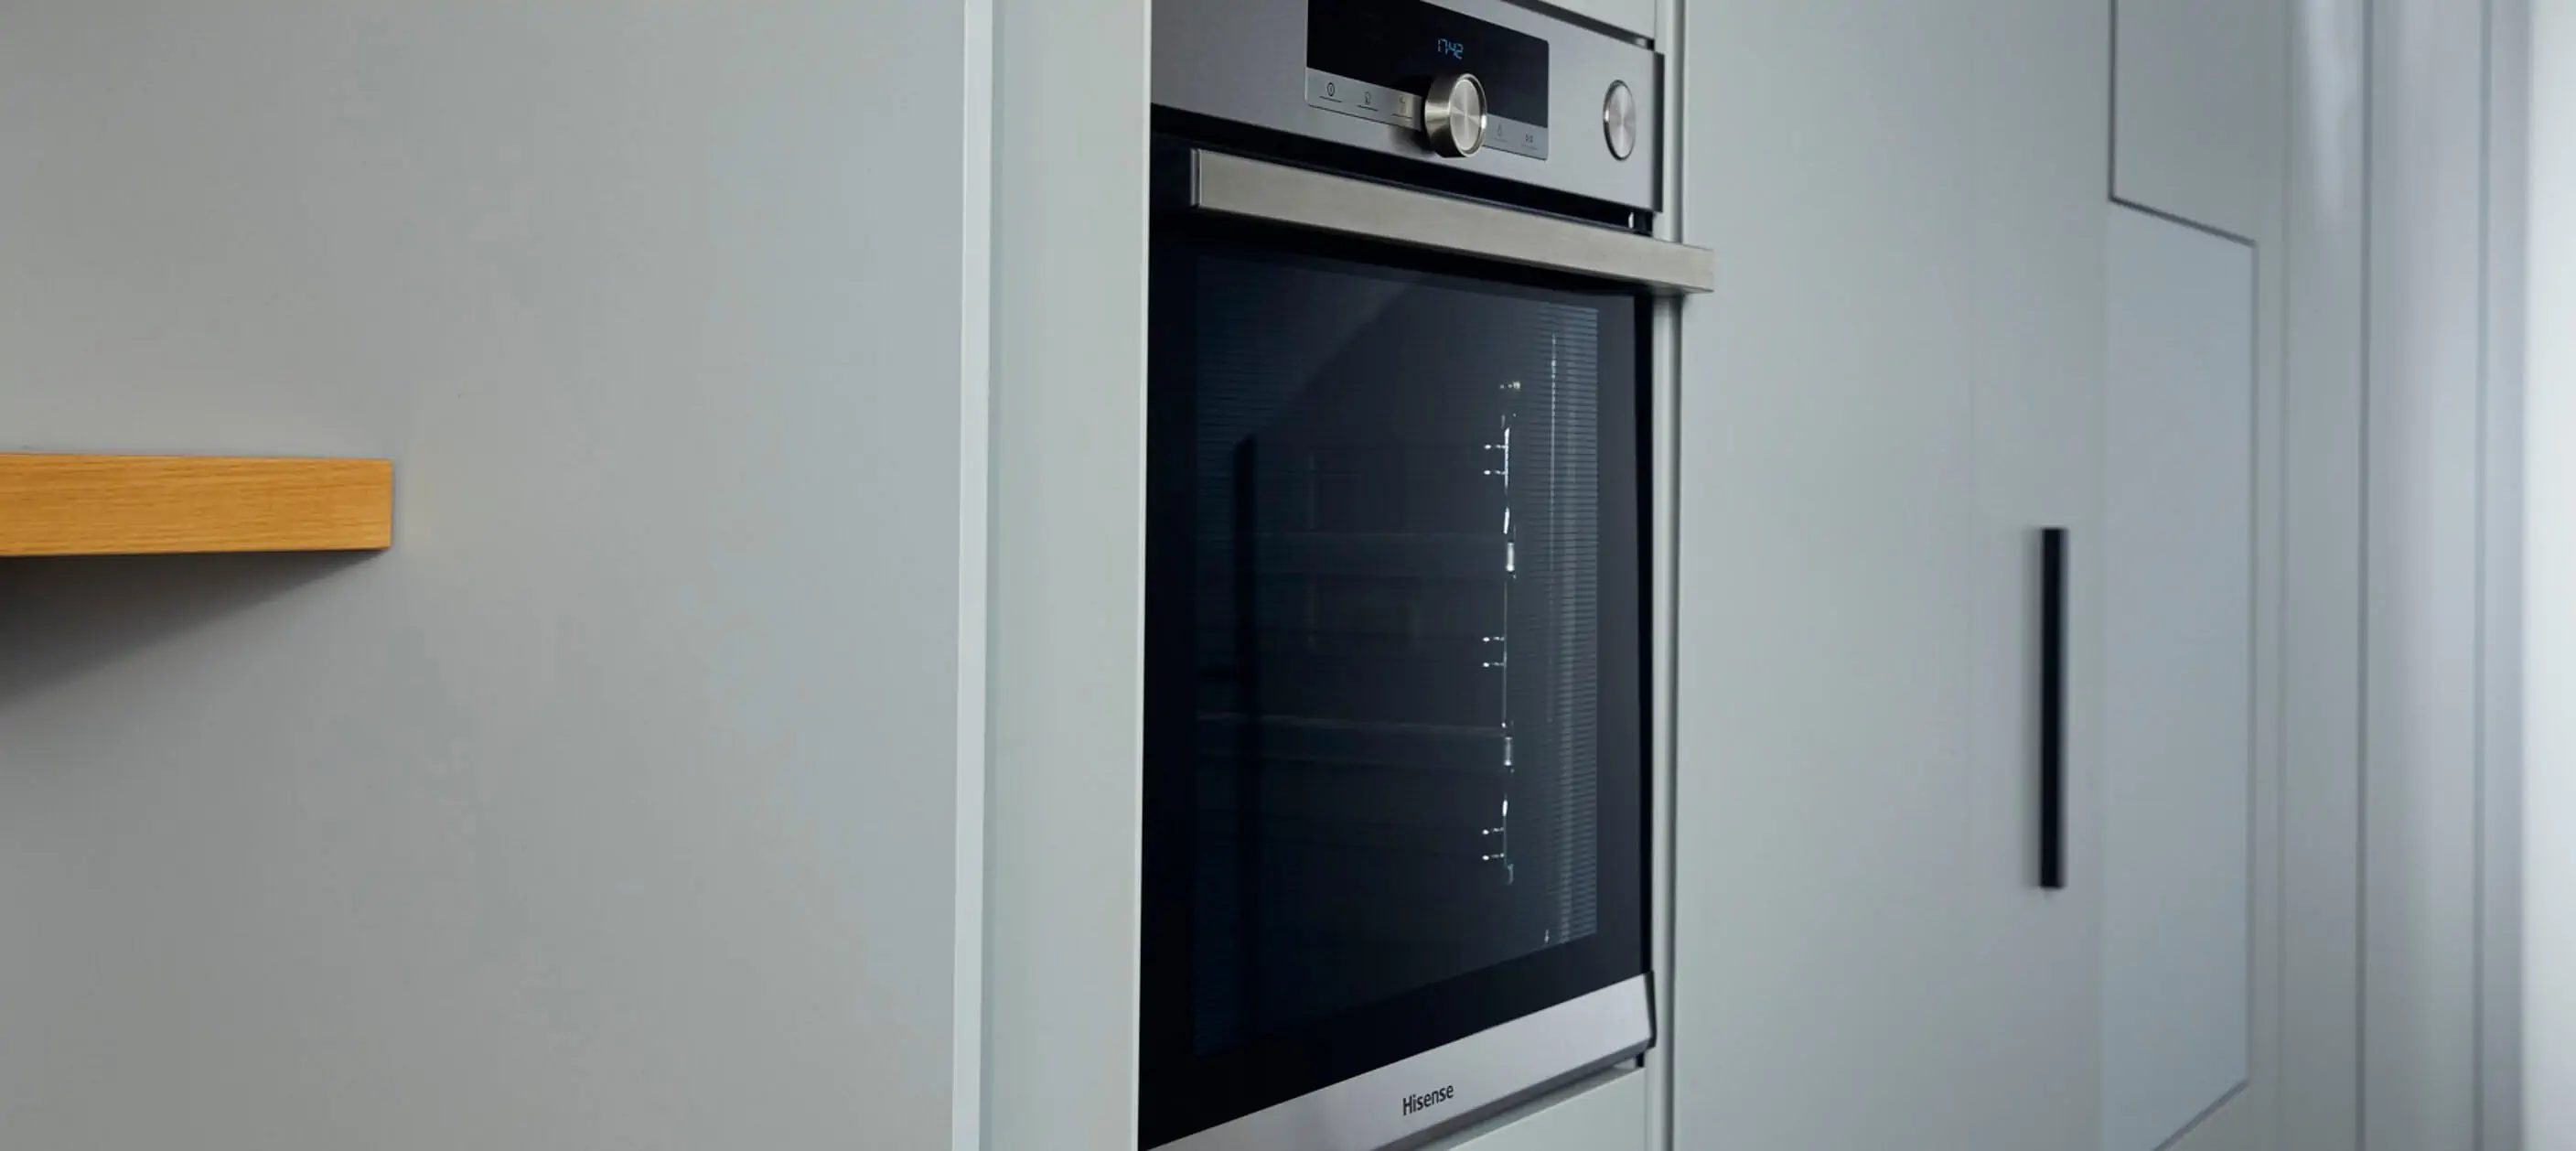 hisense-new-oven-2021-cooling-system-2816x1258-compressed.webp